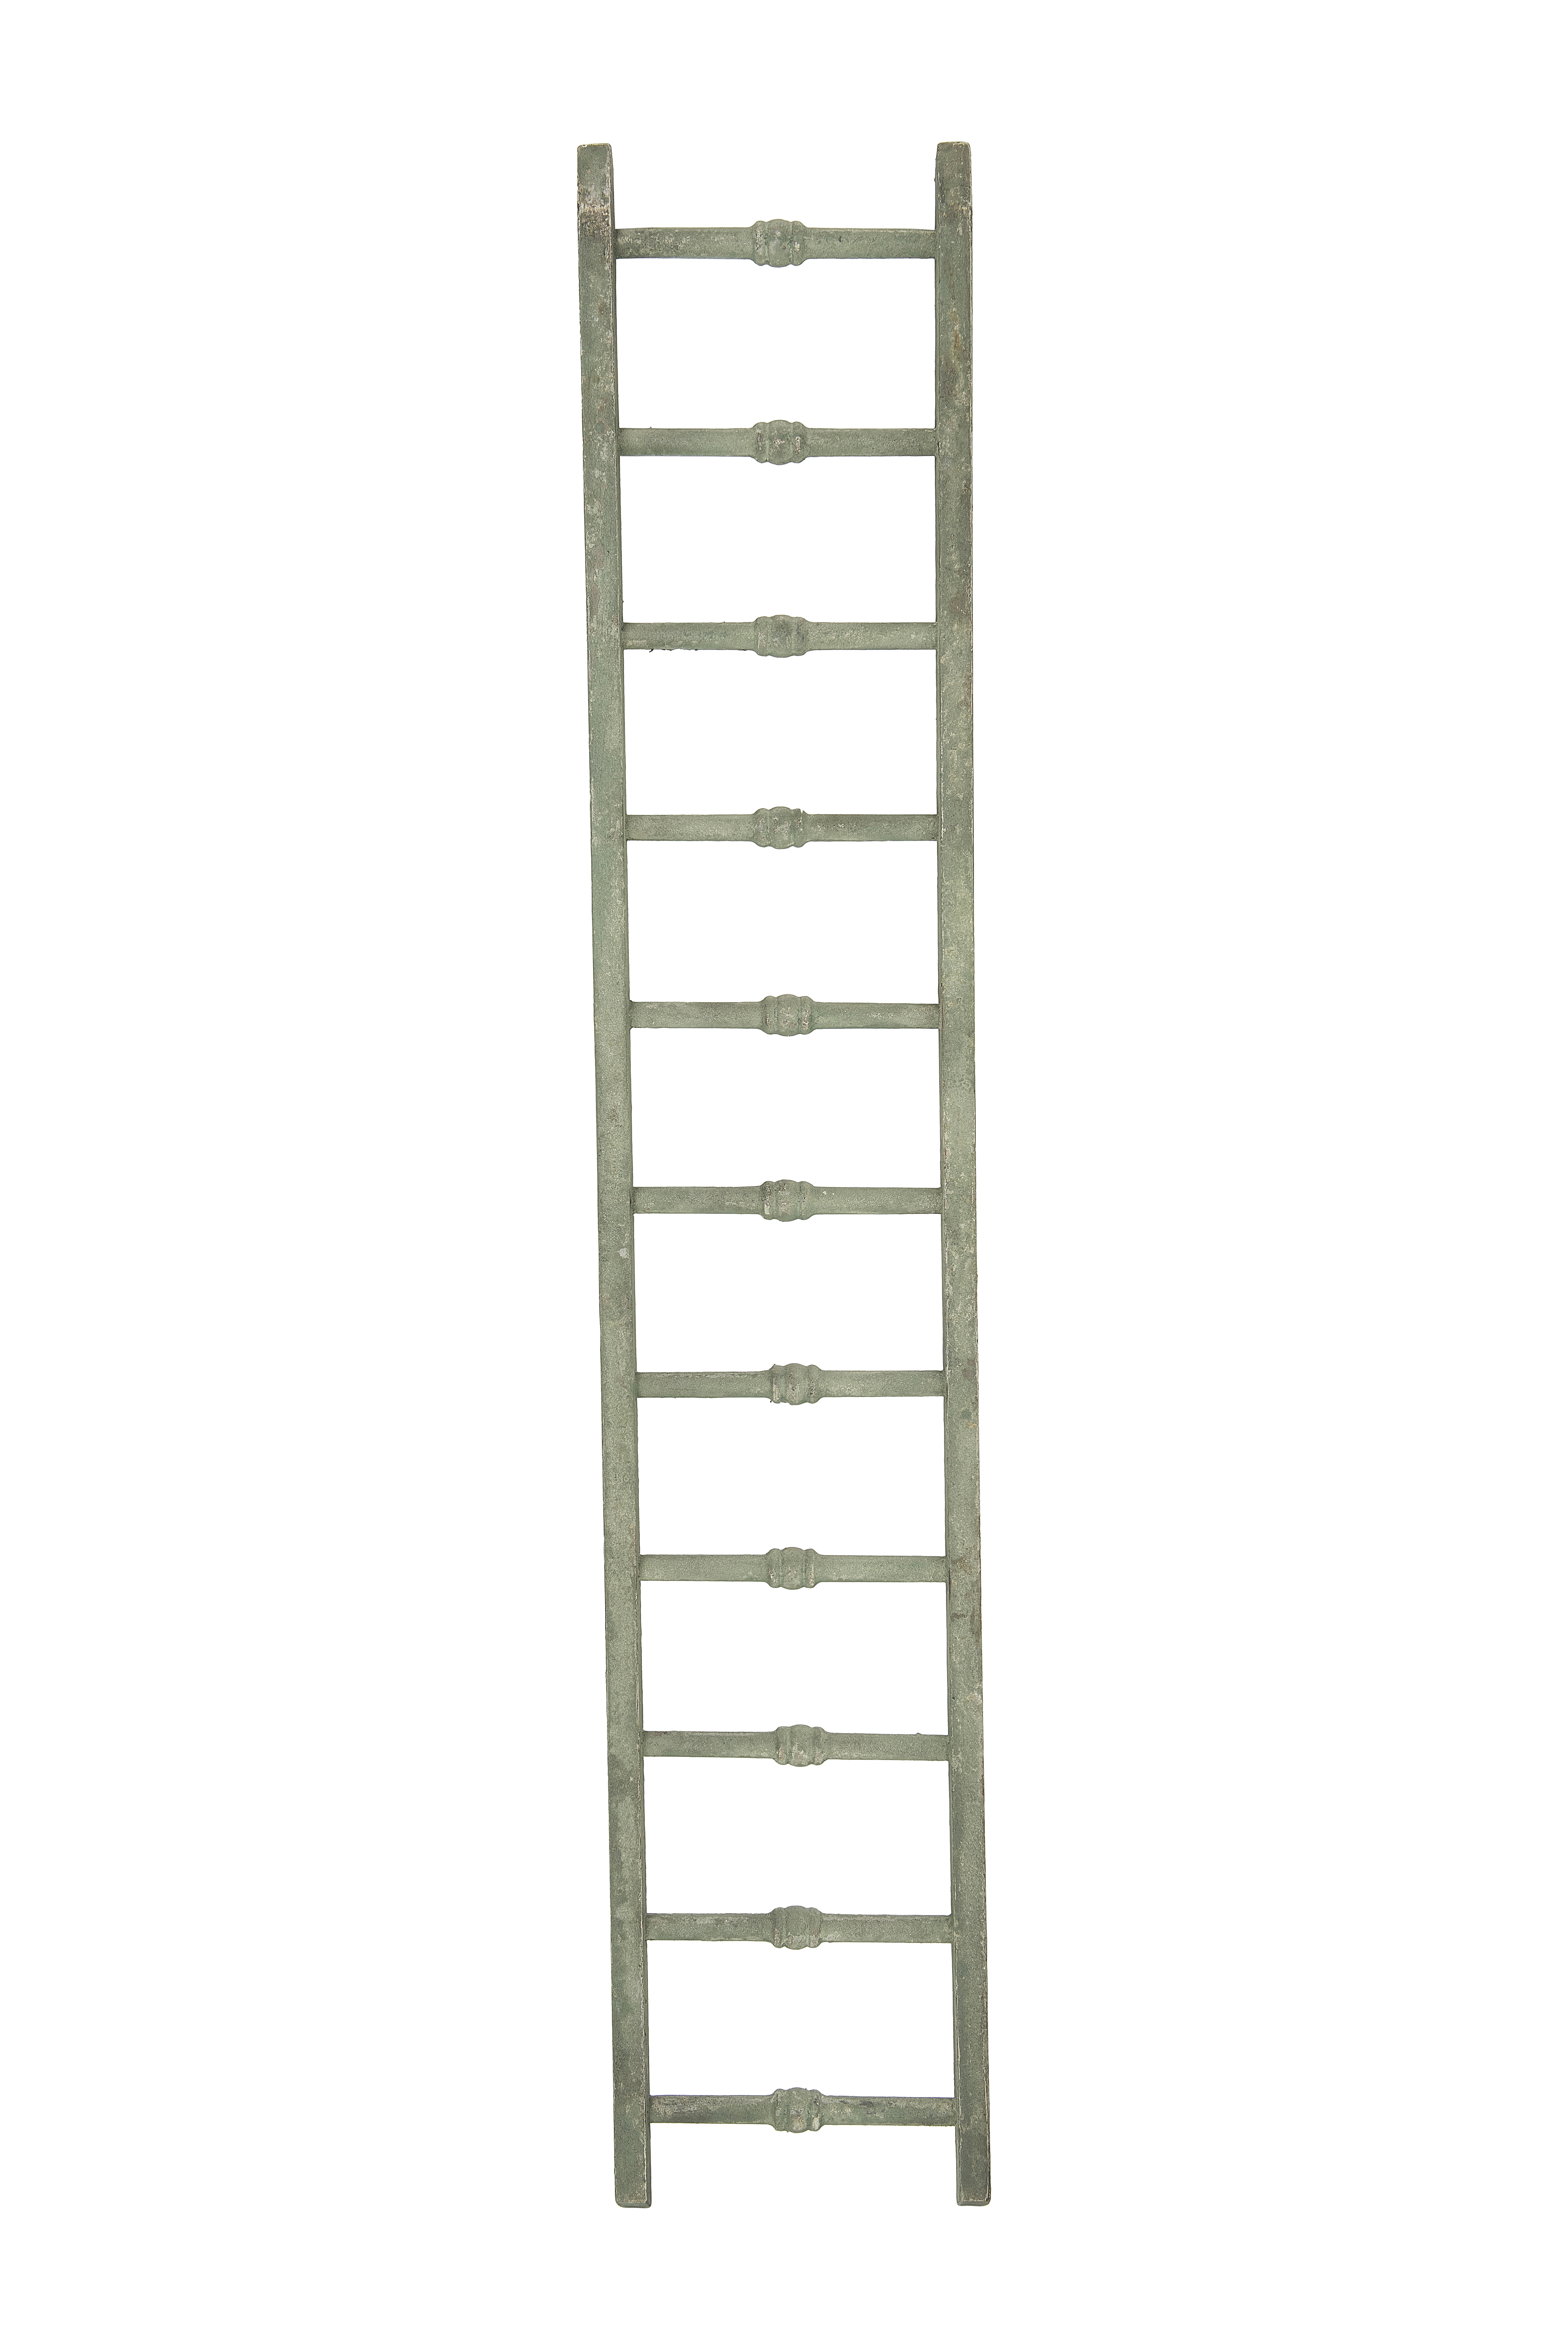 Heavily Distressed 68.75"H Decorative Pine Wood Ladder - Nomad Home